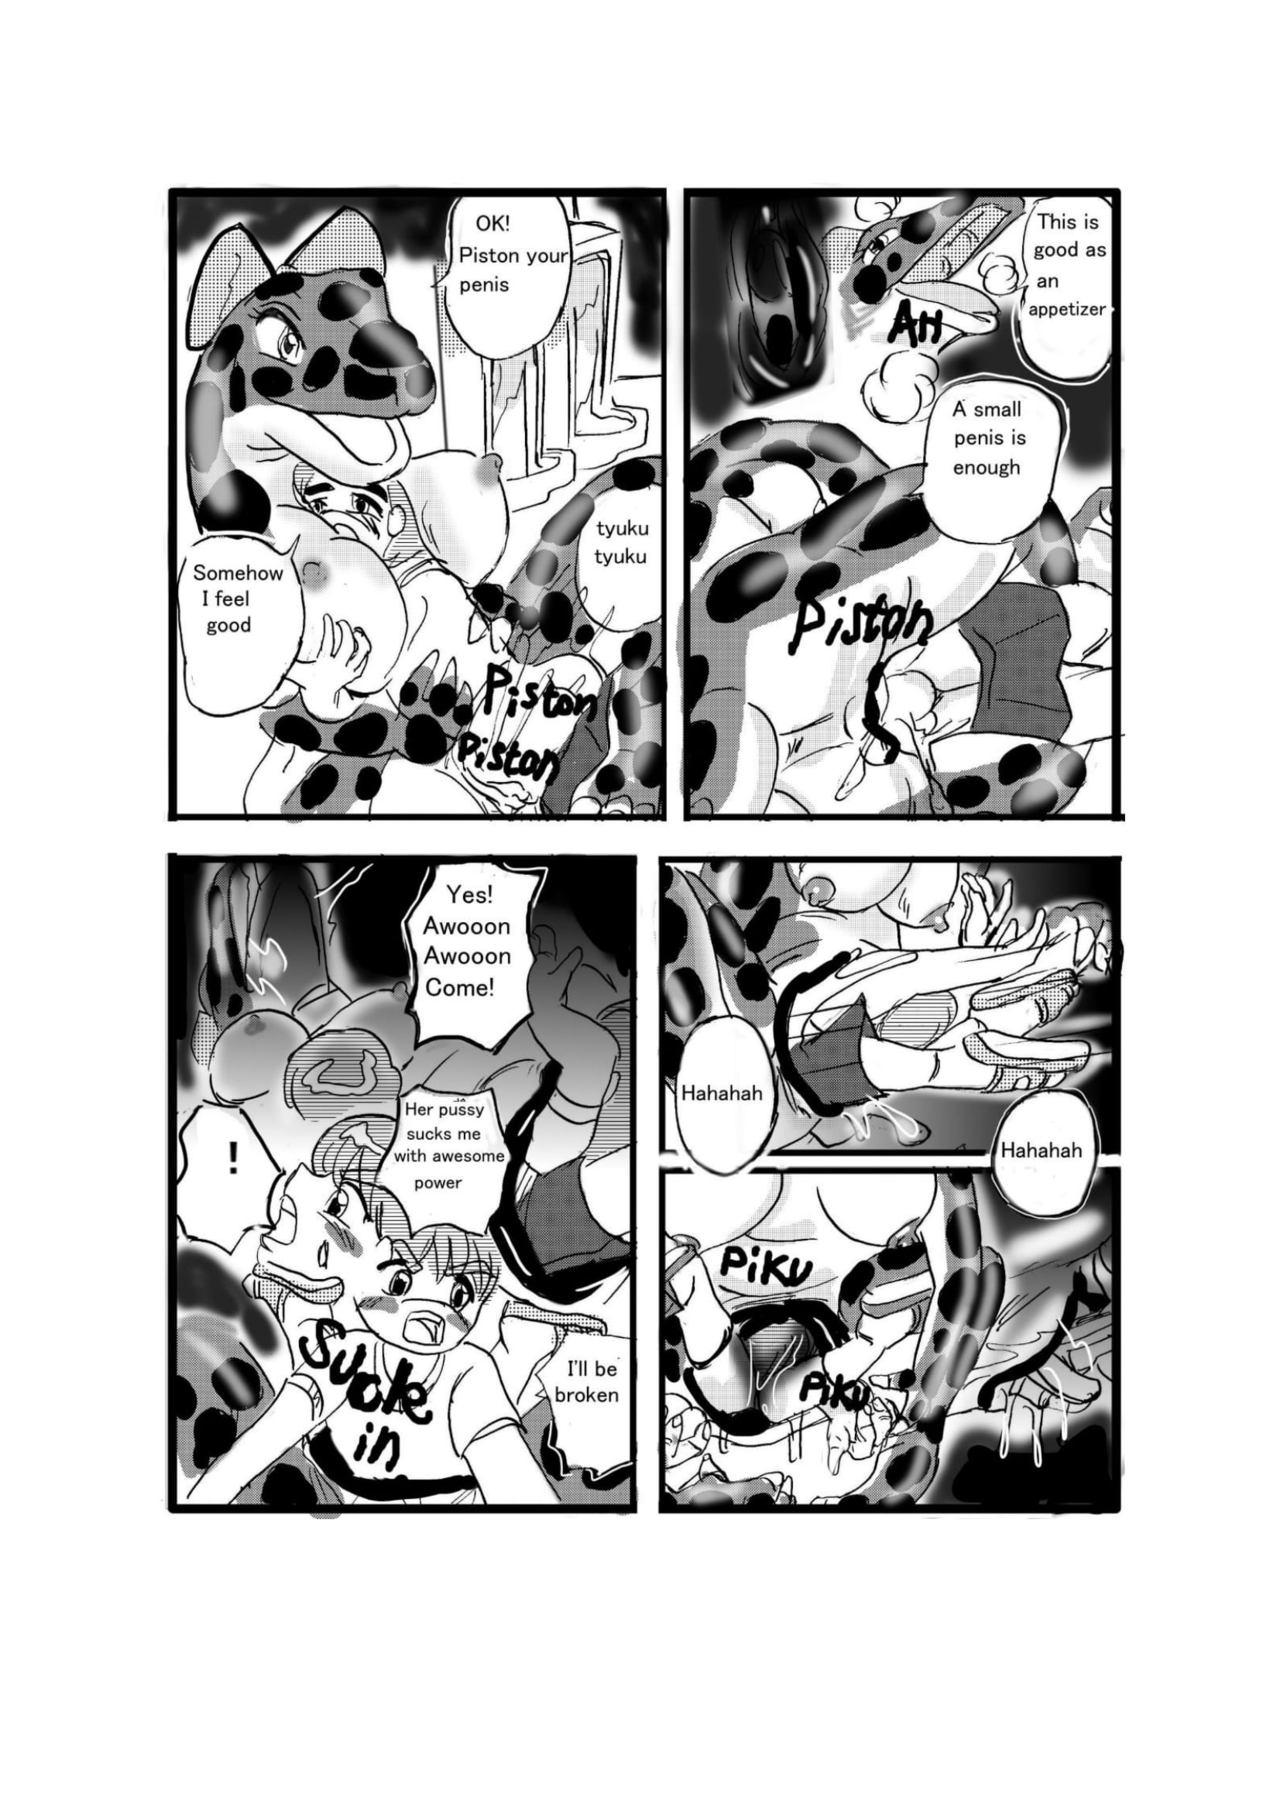 Piercing Swallowed Whole vol.2 Waniko + What's Digestion? - Original Red - Page 5